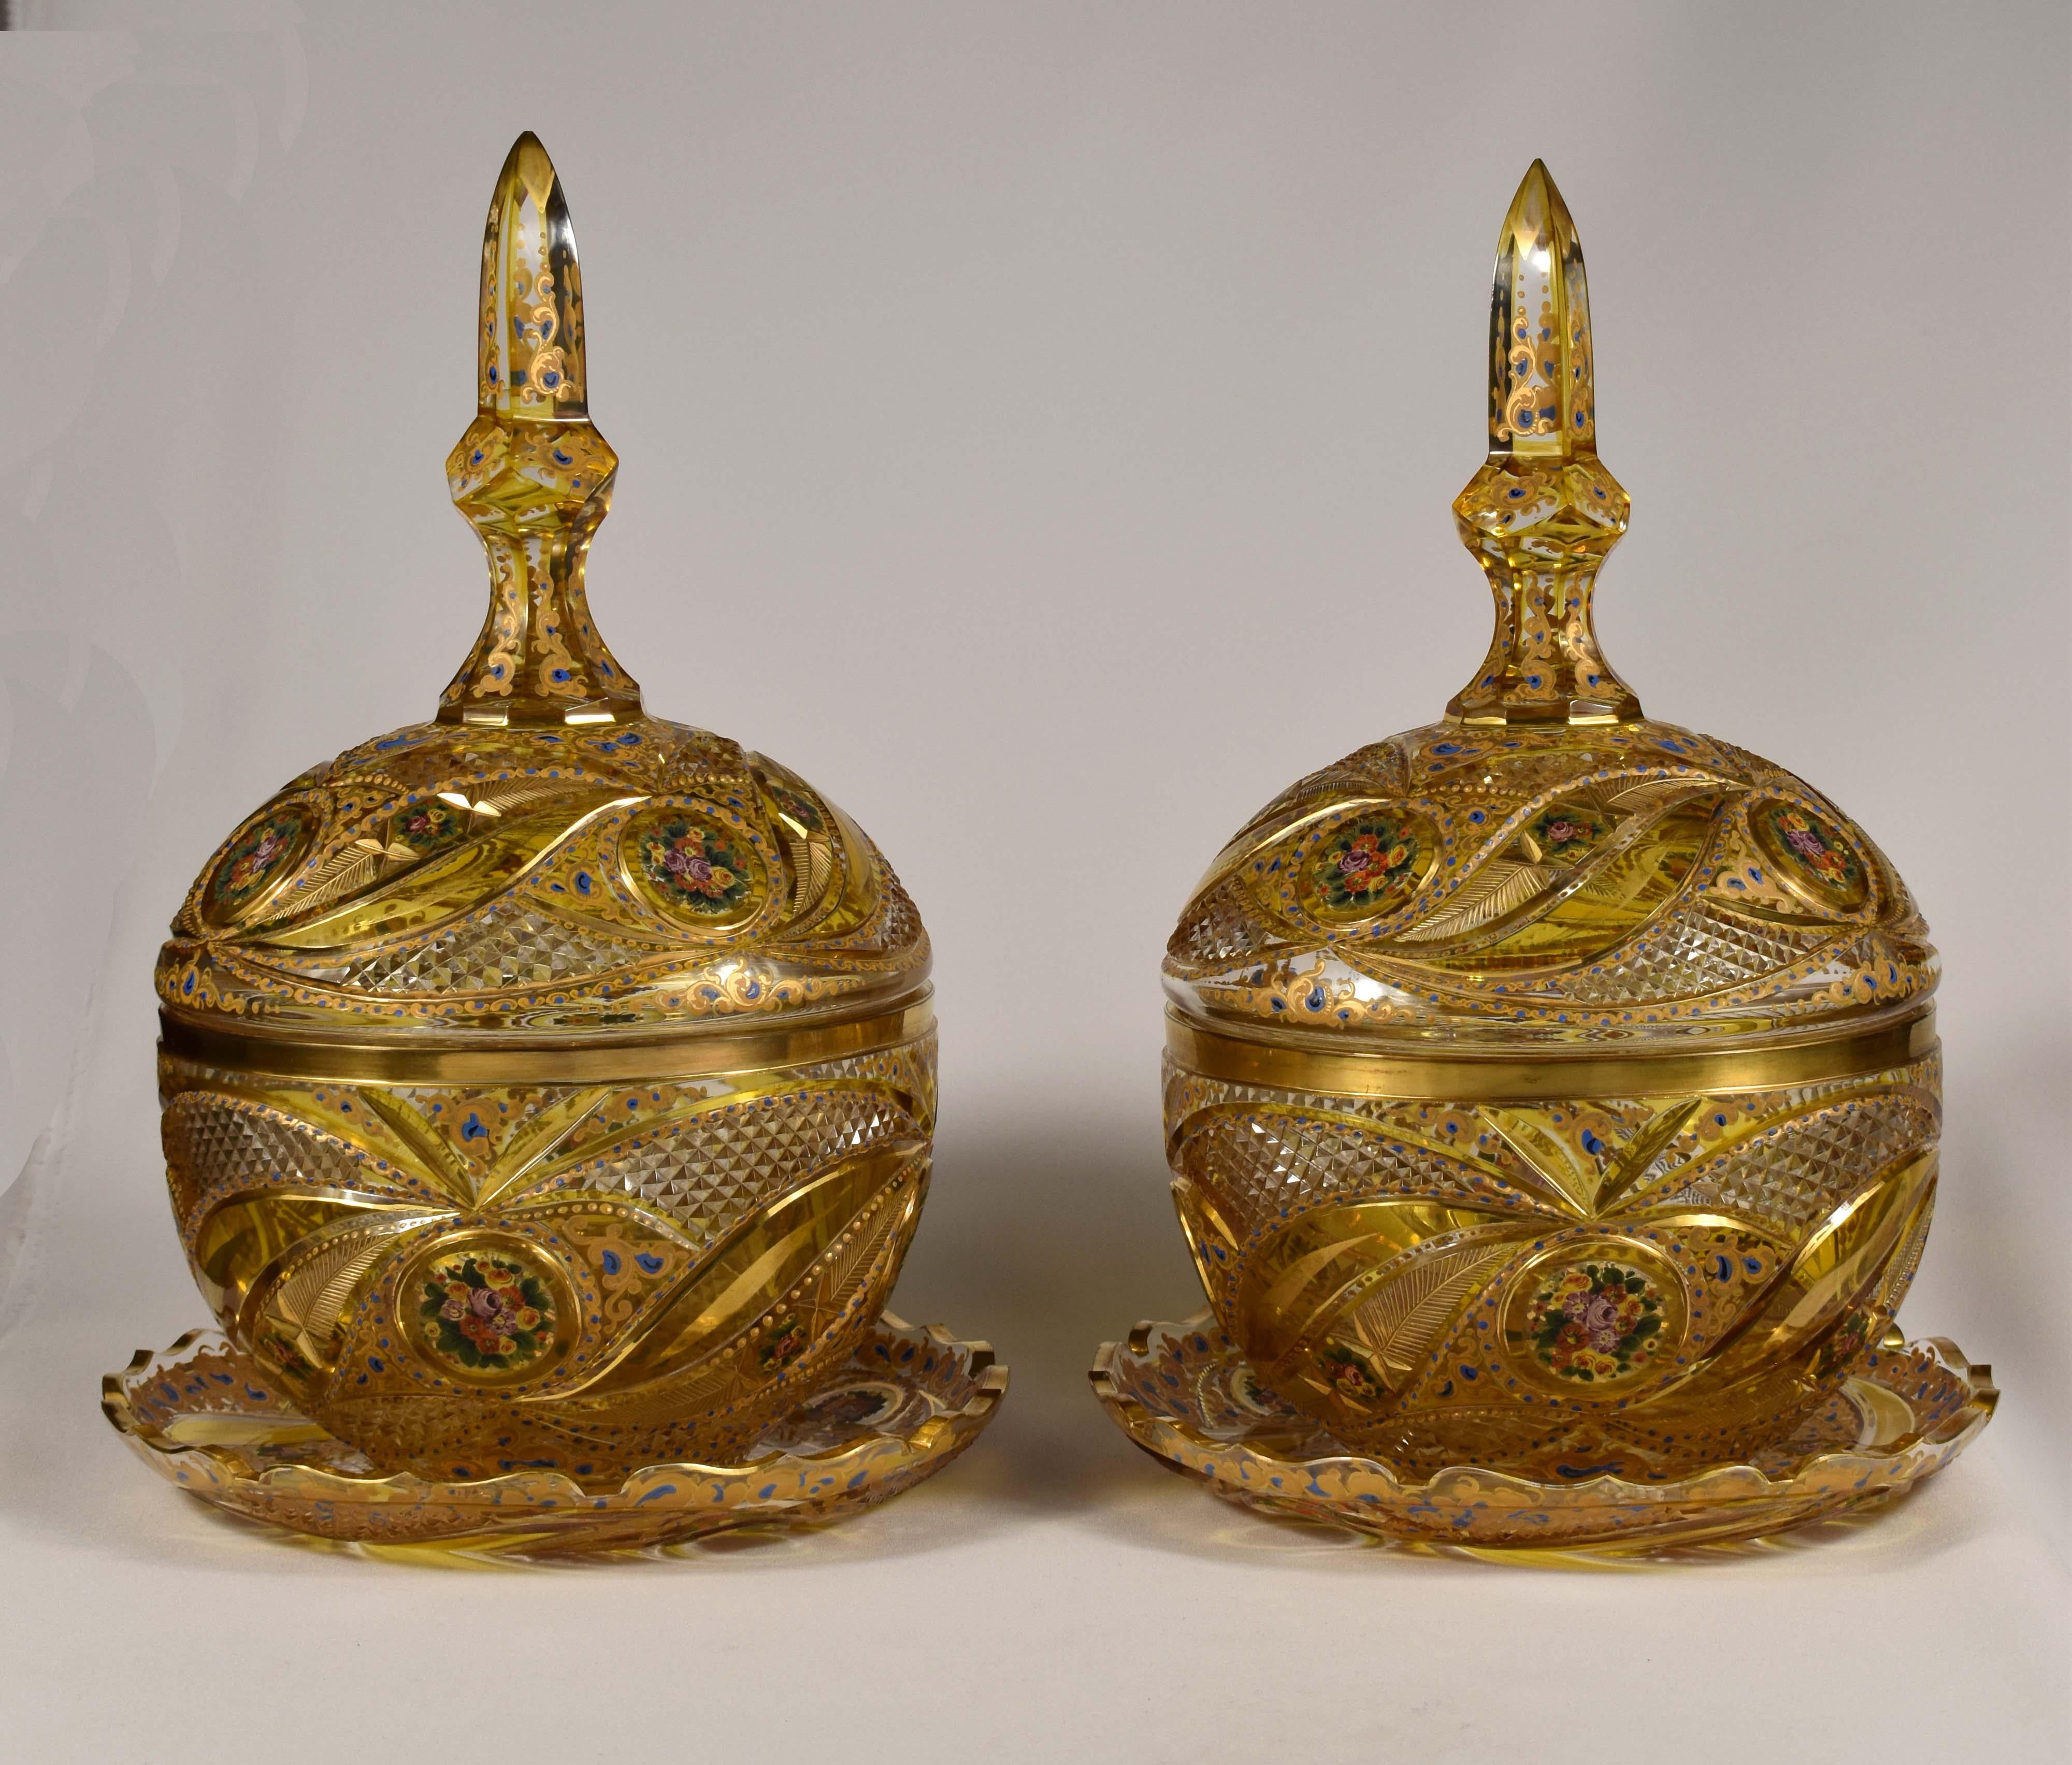 It is a clear glass with yellow glaze, cut and painted, This is Bohemian glass of the 20th century ,Made for the Persian or Ottoman market, The set consists of a lid jar and a plate, nothing is damaged.